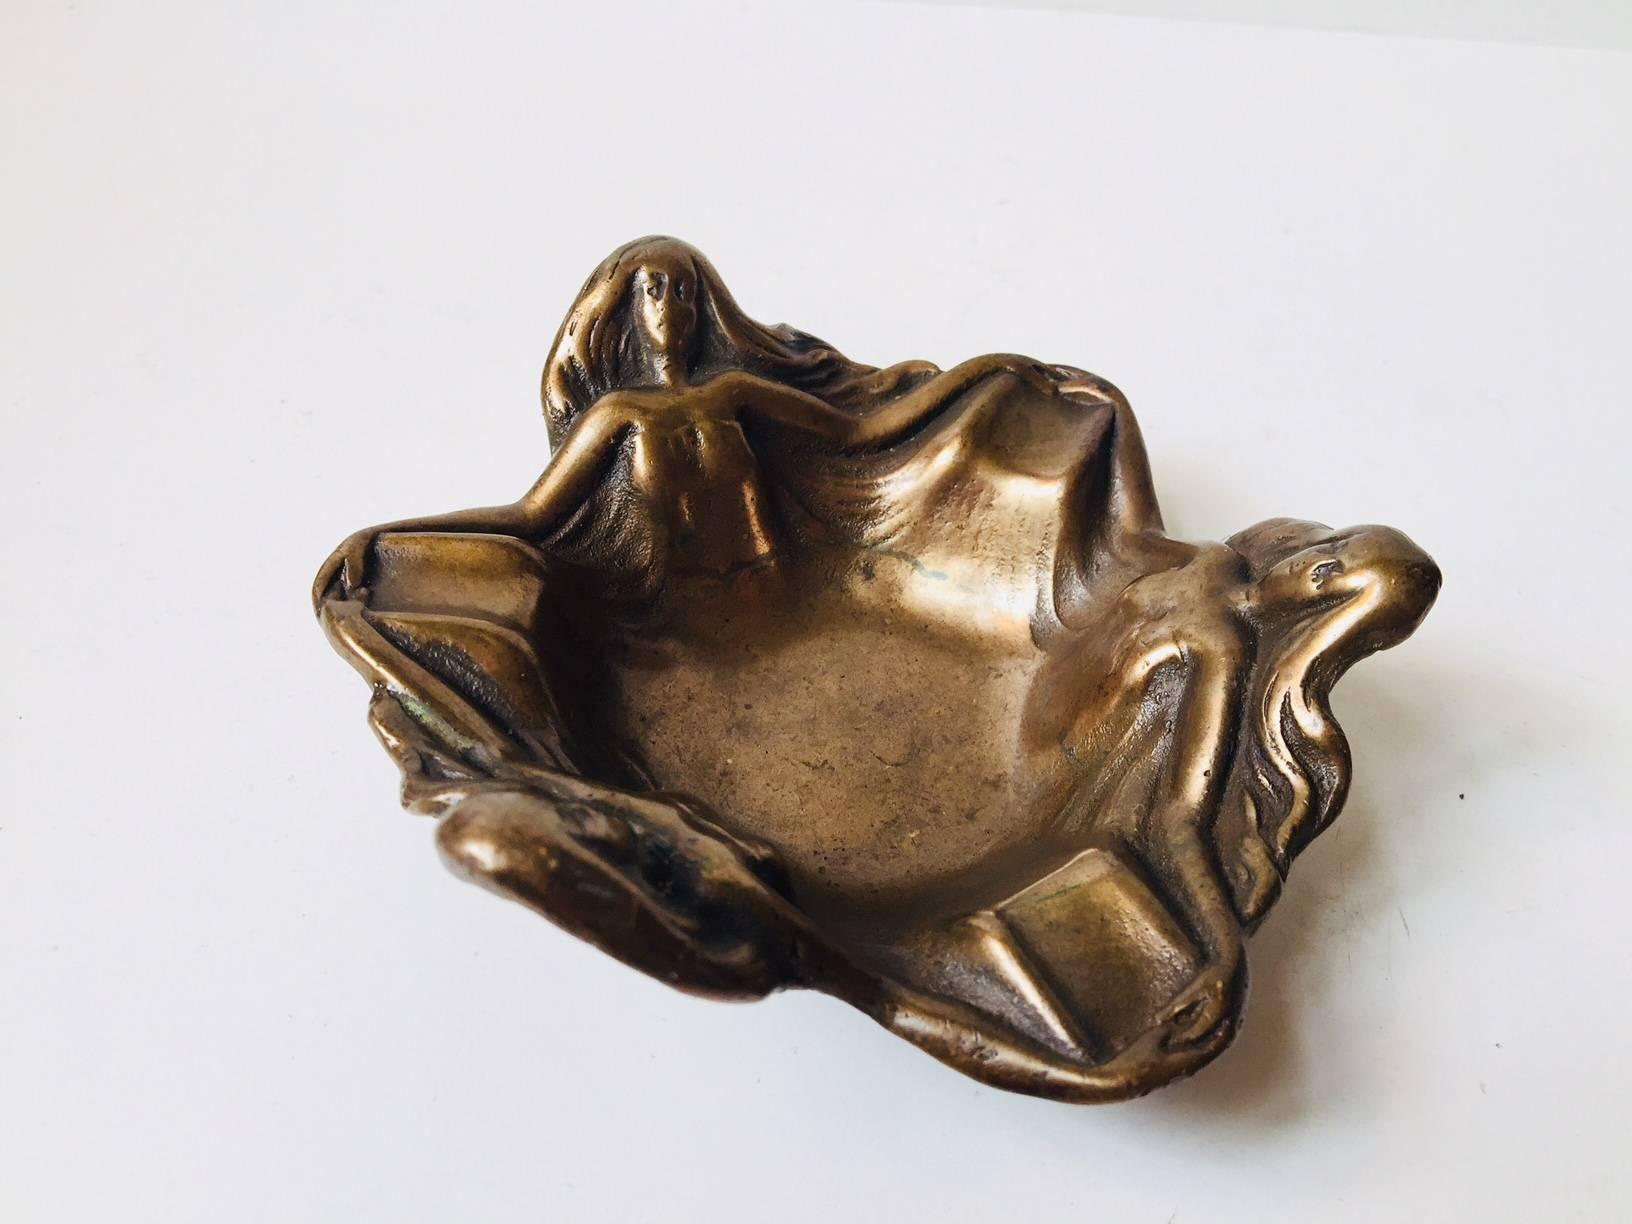 A cast brass cigar ashtray depicting three women dancing/holding hands in a circle. Manufactured in France during the 1920s or 1930s. It is richly patinated and it has seen its use. However its still intact, charming and it has another 100 years of